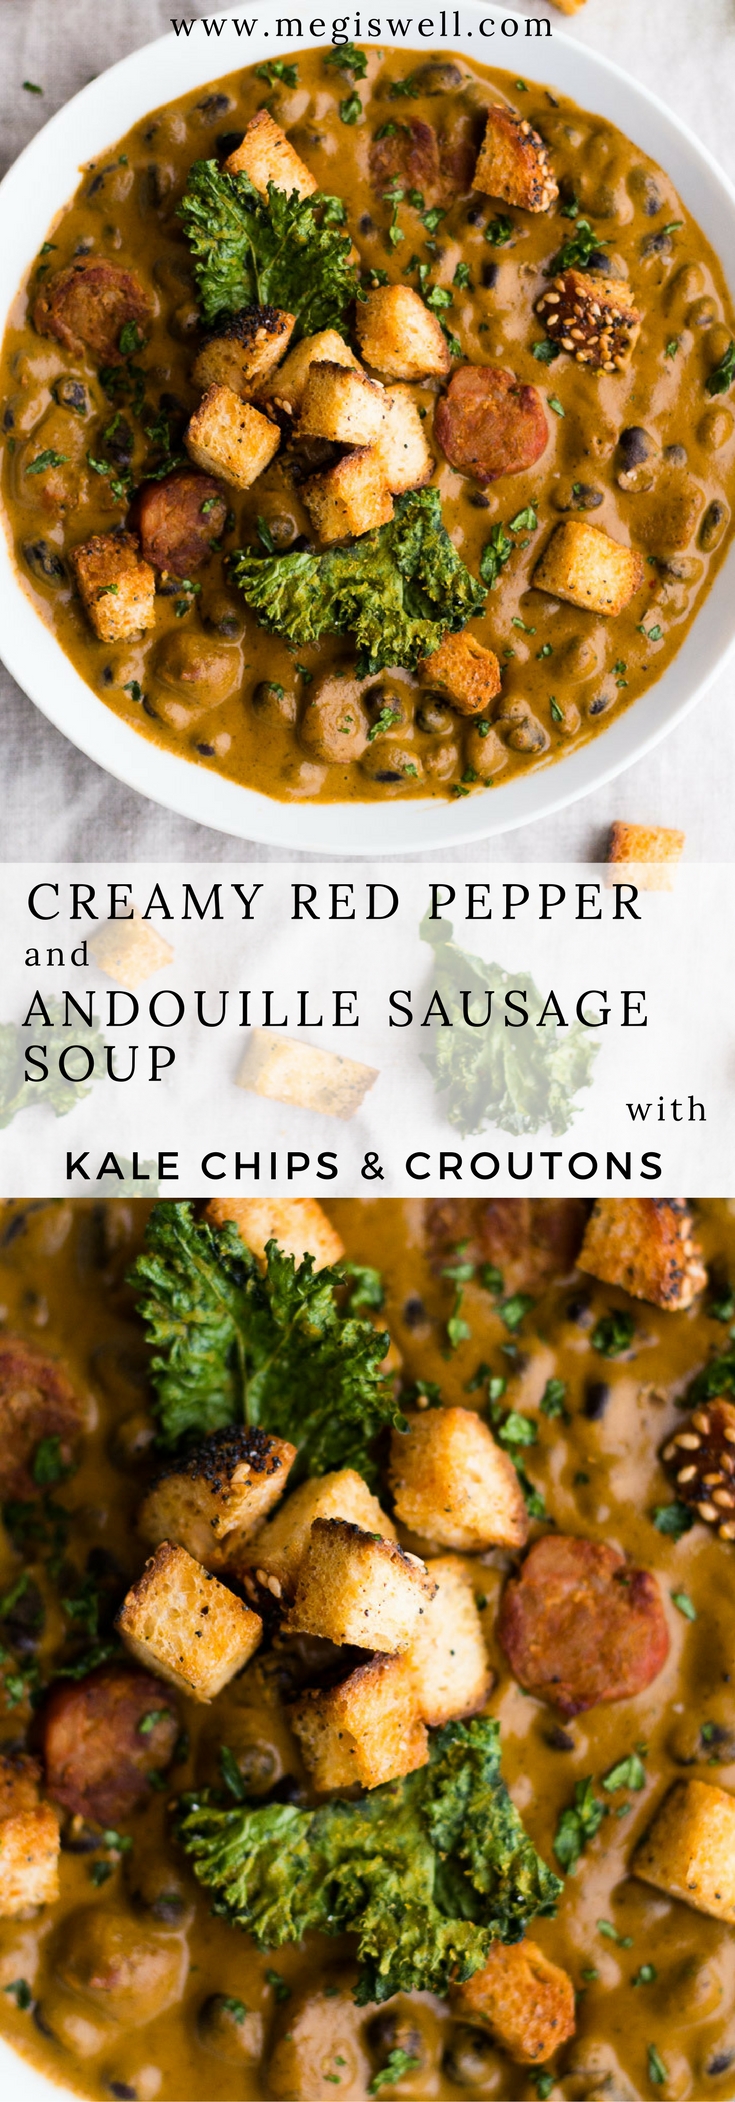 This Creamy Red Pepper and Andouille Sausage Soup is decadently spicy, rich, and creamy. Packed with veggies, Havarti cheese, and topped with kale chips and croutons, this is a “calories don’t count” comfort food soup. | #soup | www.megiswell.com